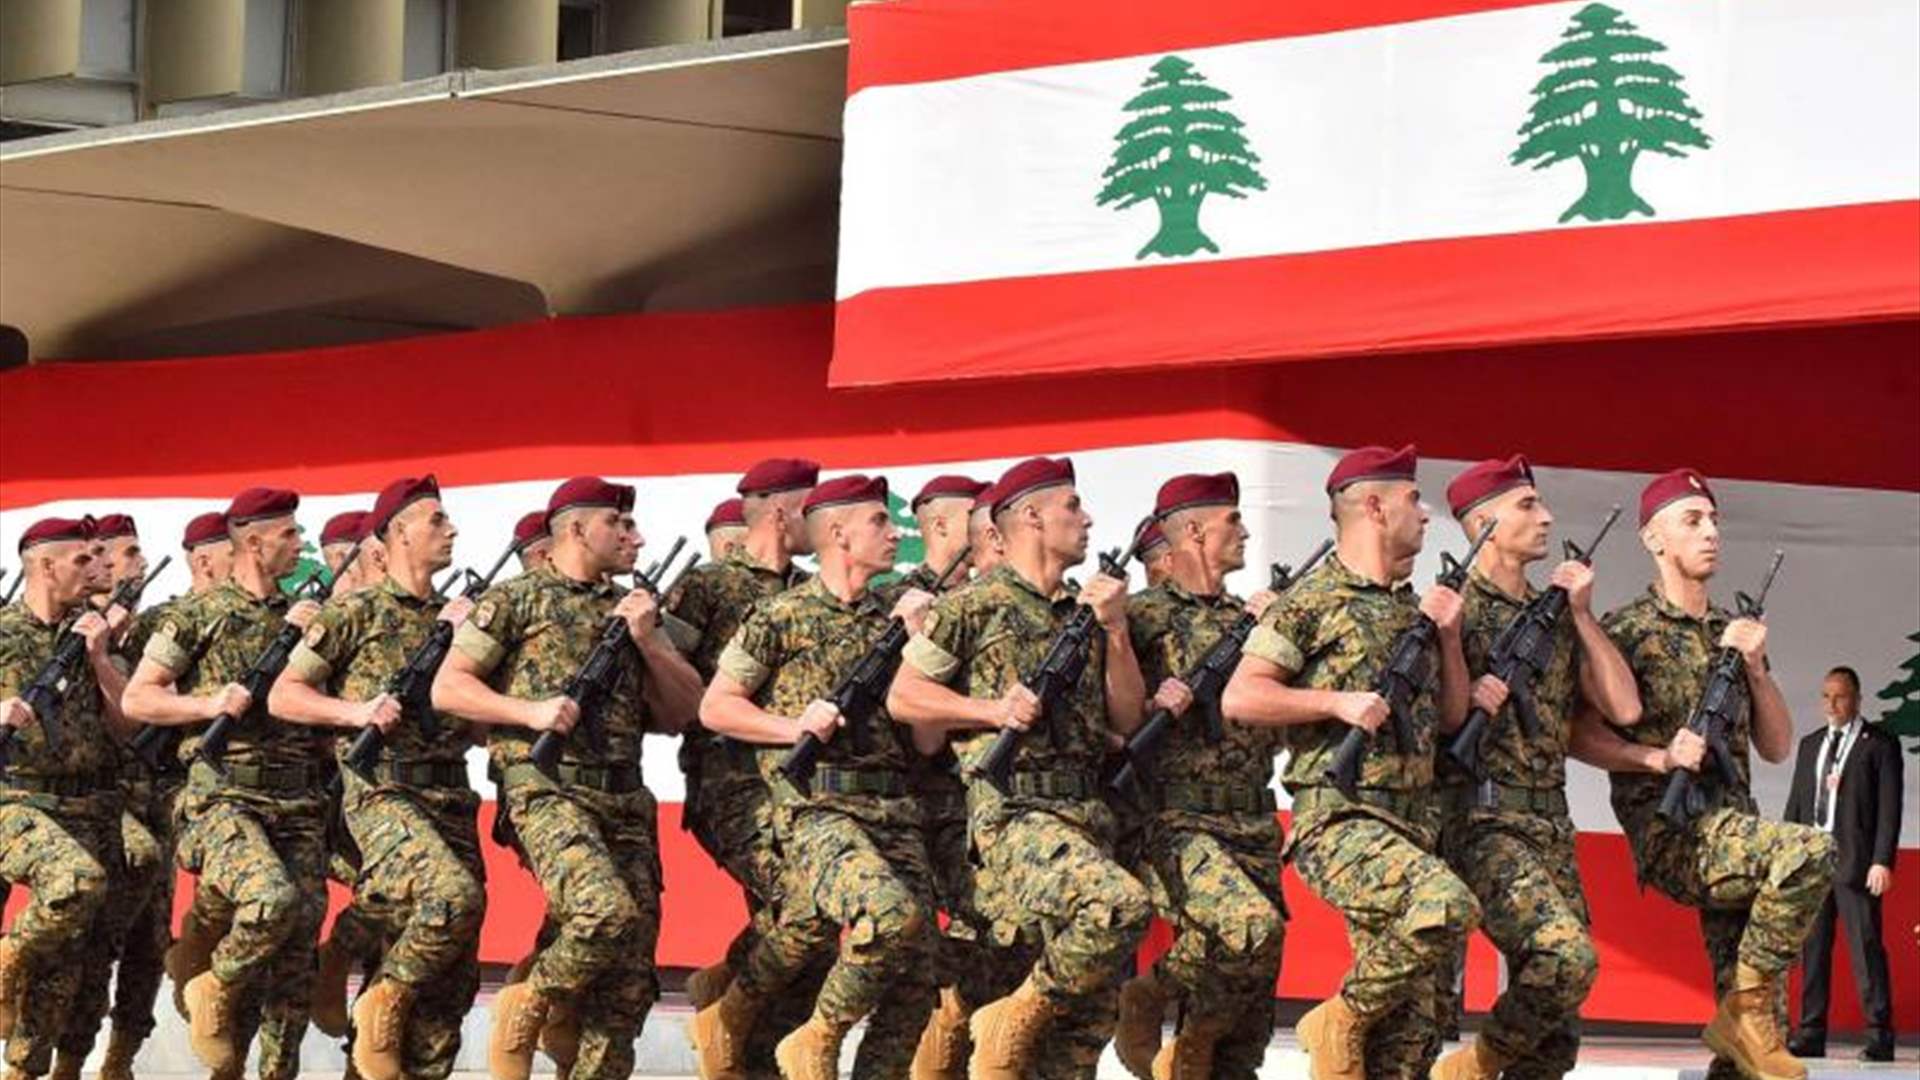 Vacancy in Chief of Staff Role Intensifies Concerns over Lebanon&#39;s Military Leadership